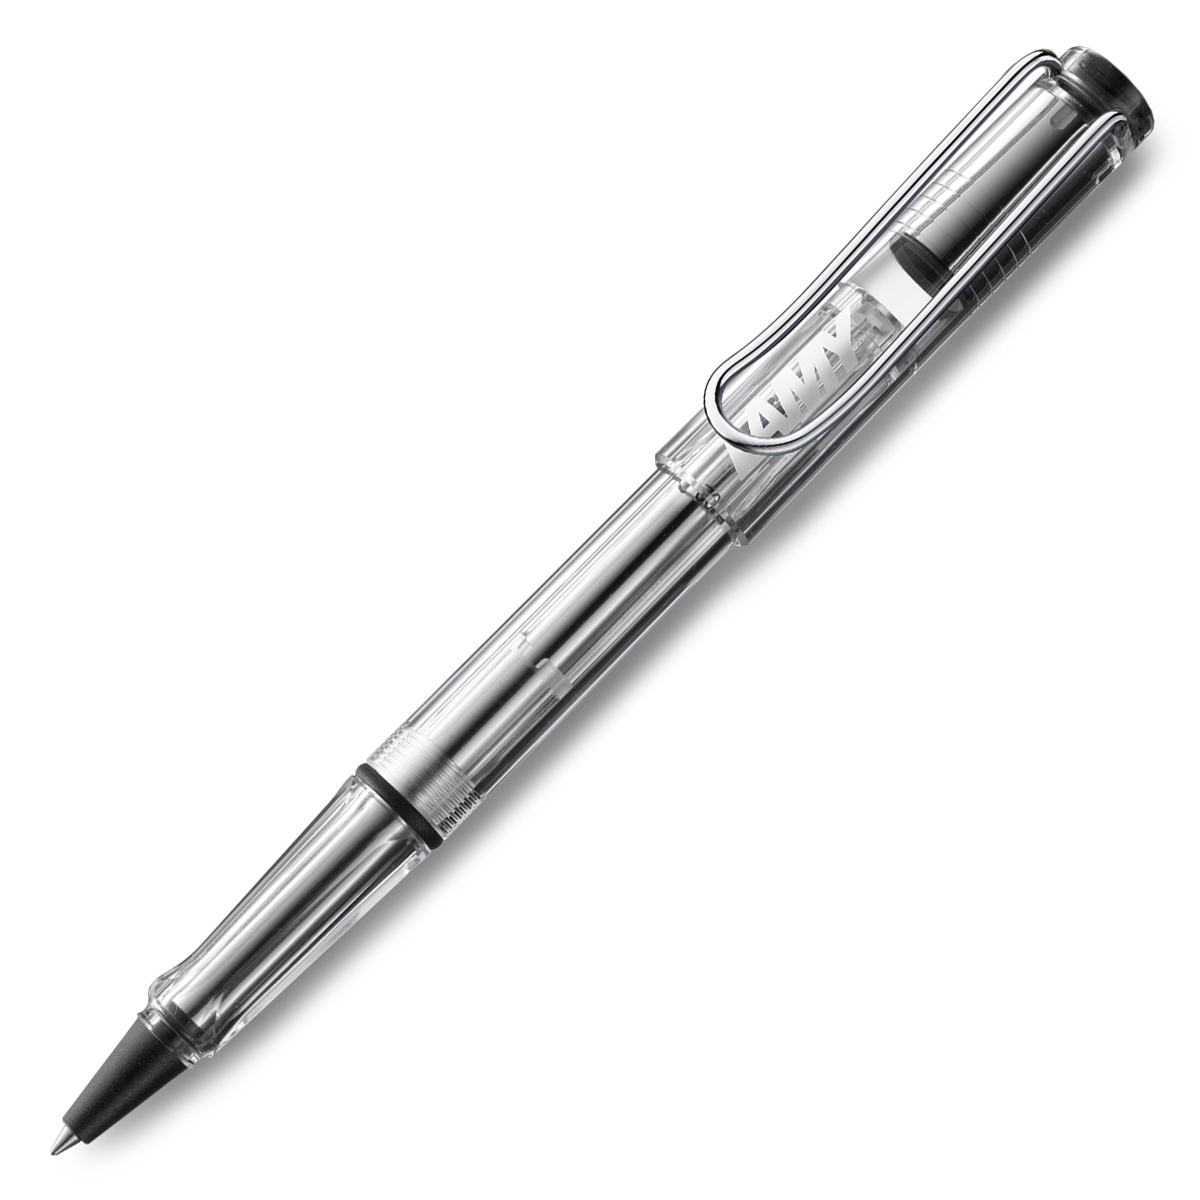 Vista Rollerball in the group Pens / Fine Writing / Gift Pens at Pen Store (101971)